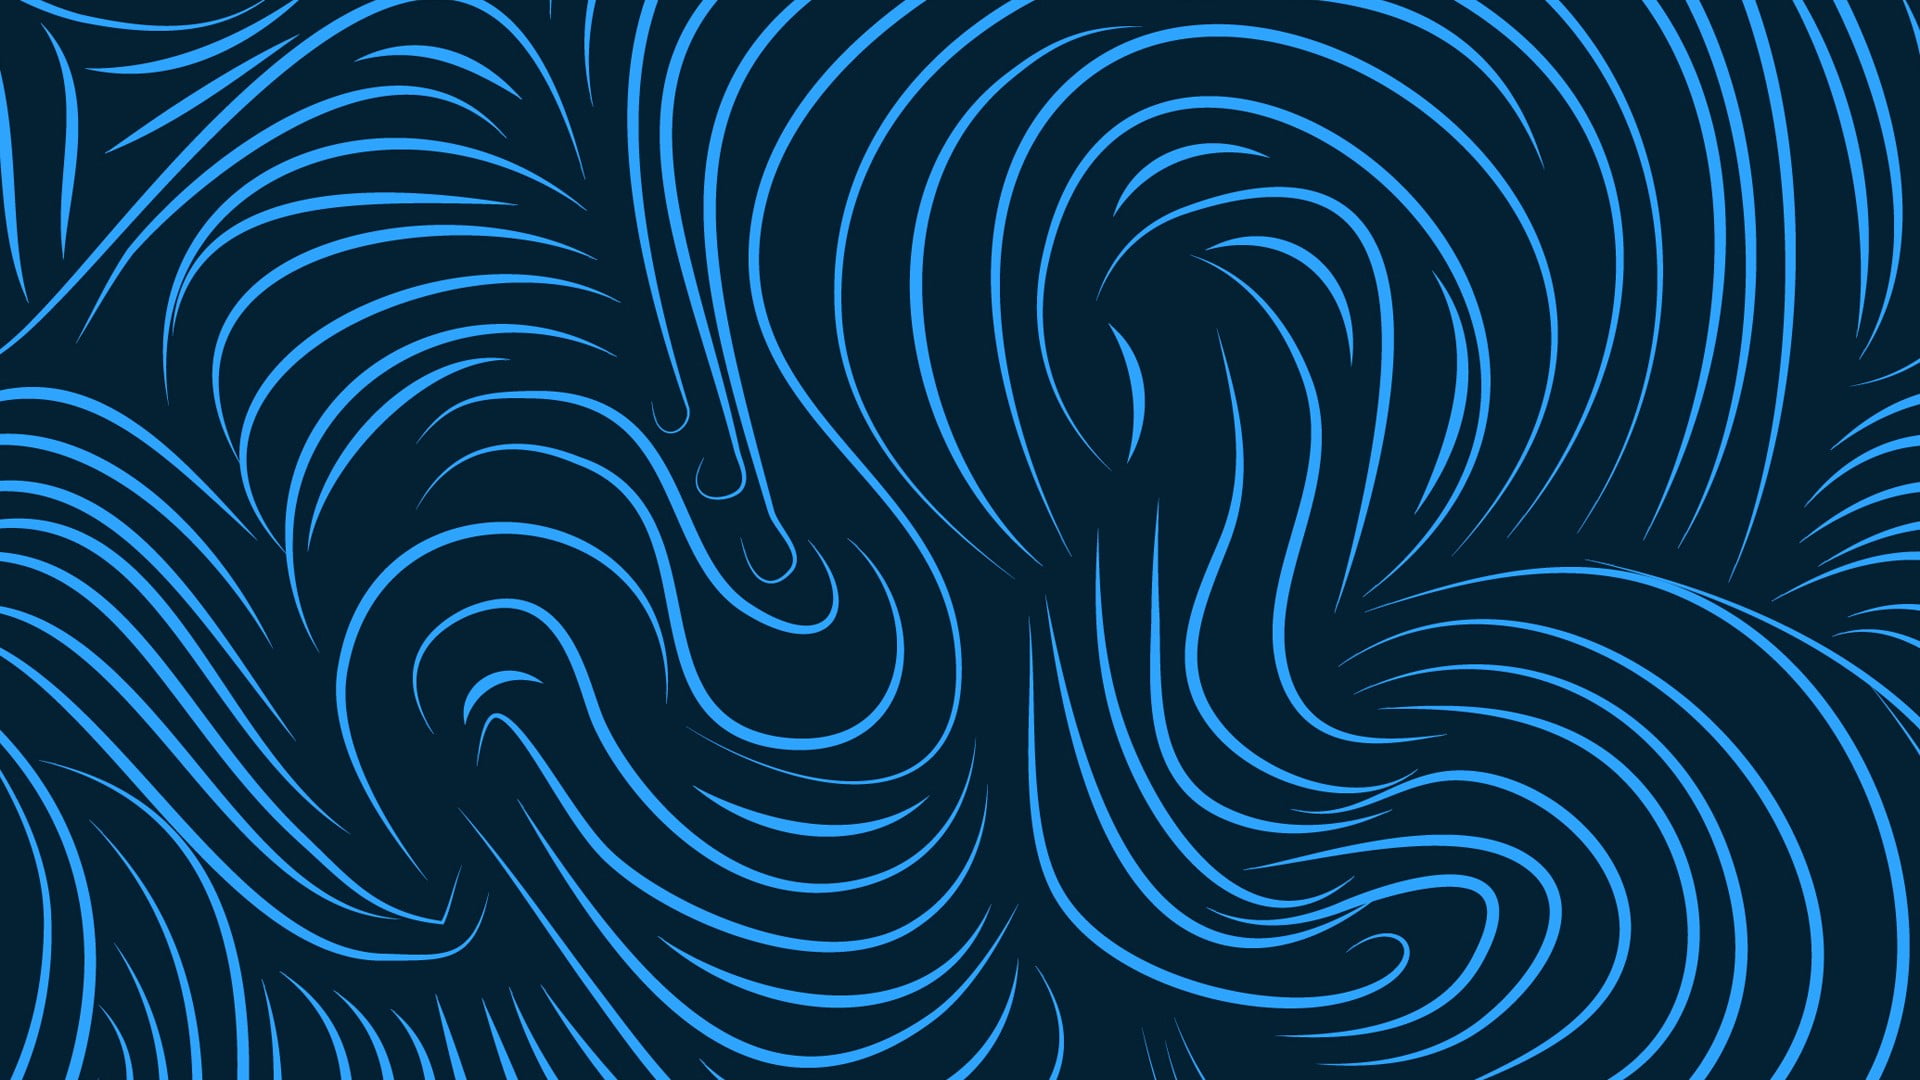 X Resolution Blue And Black Abstract Painting Abstract Lines Blue Wavy Lines Hd